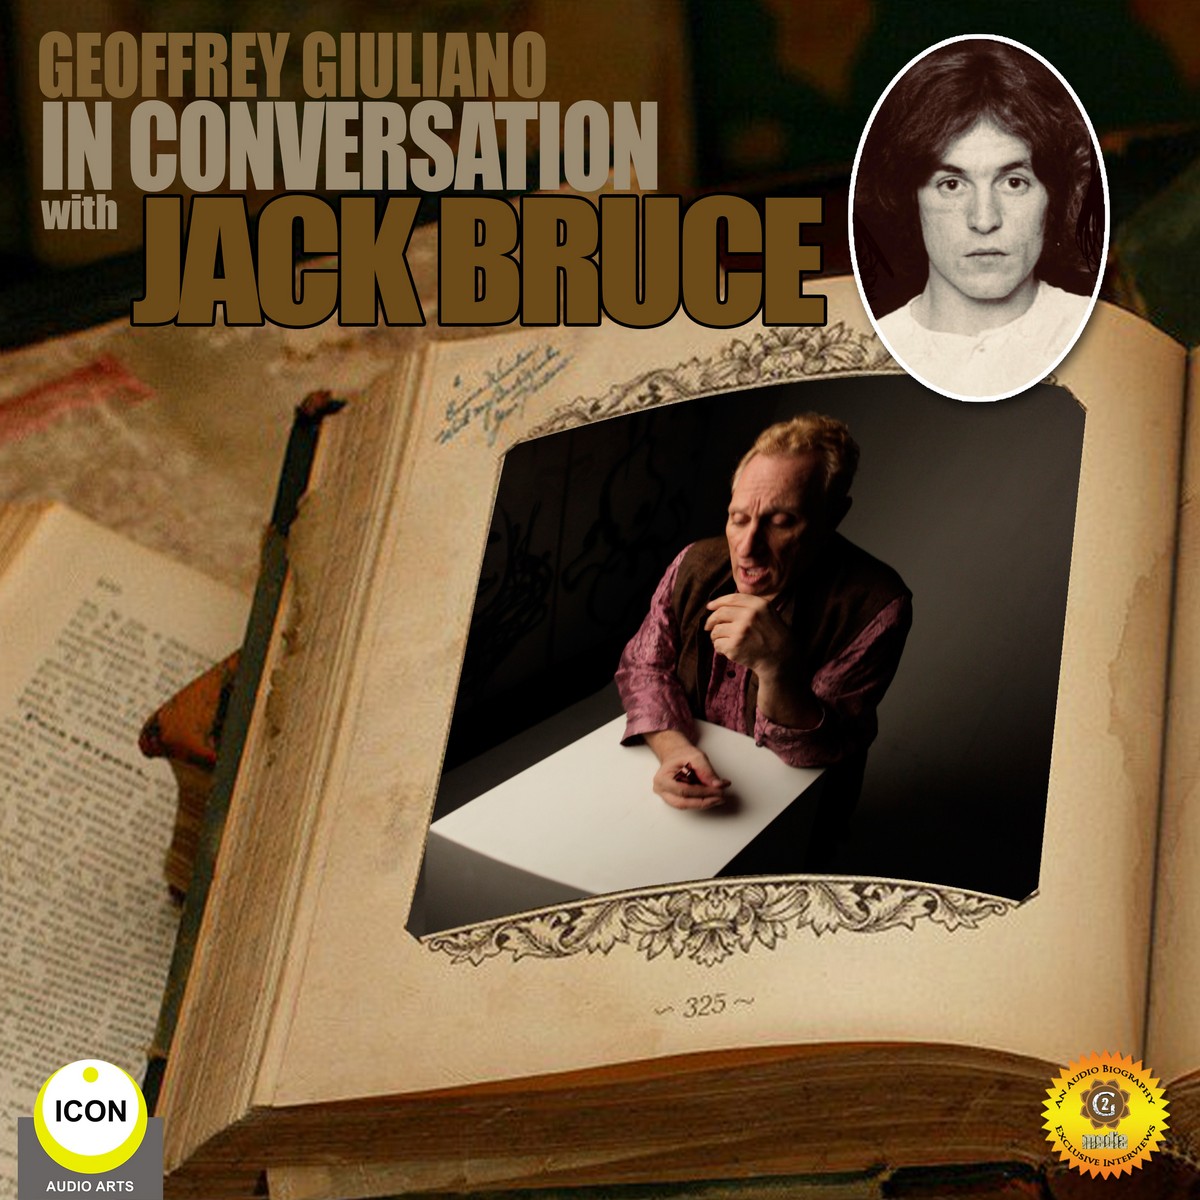 Geoffrey Giuliano in Conversation with Jack Bruce